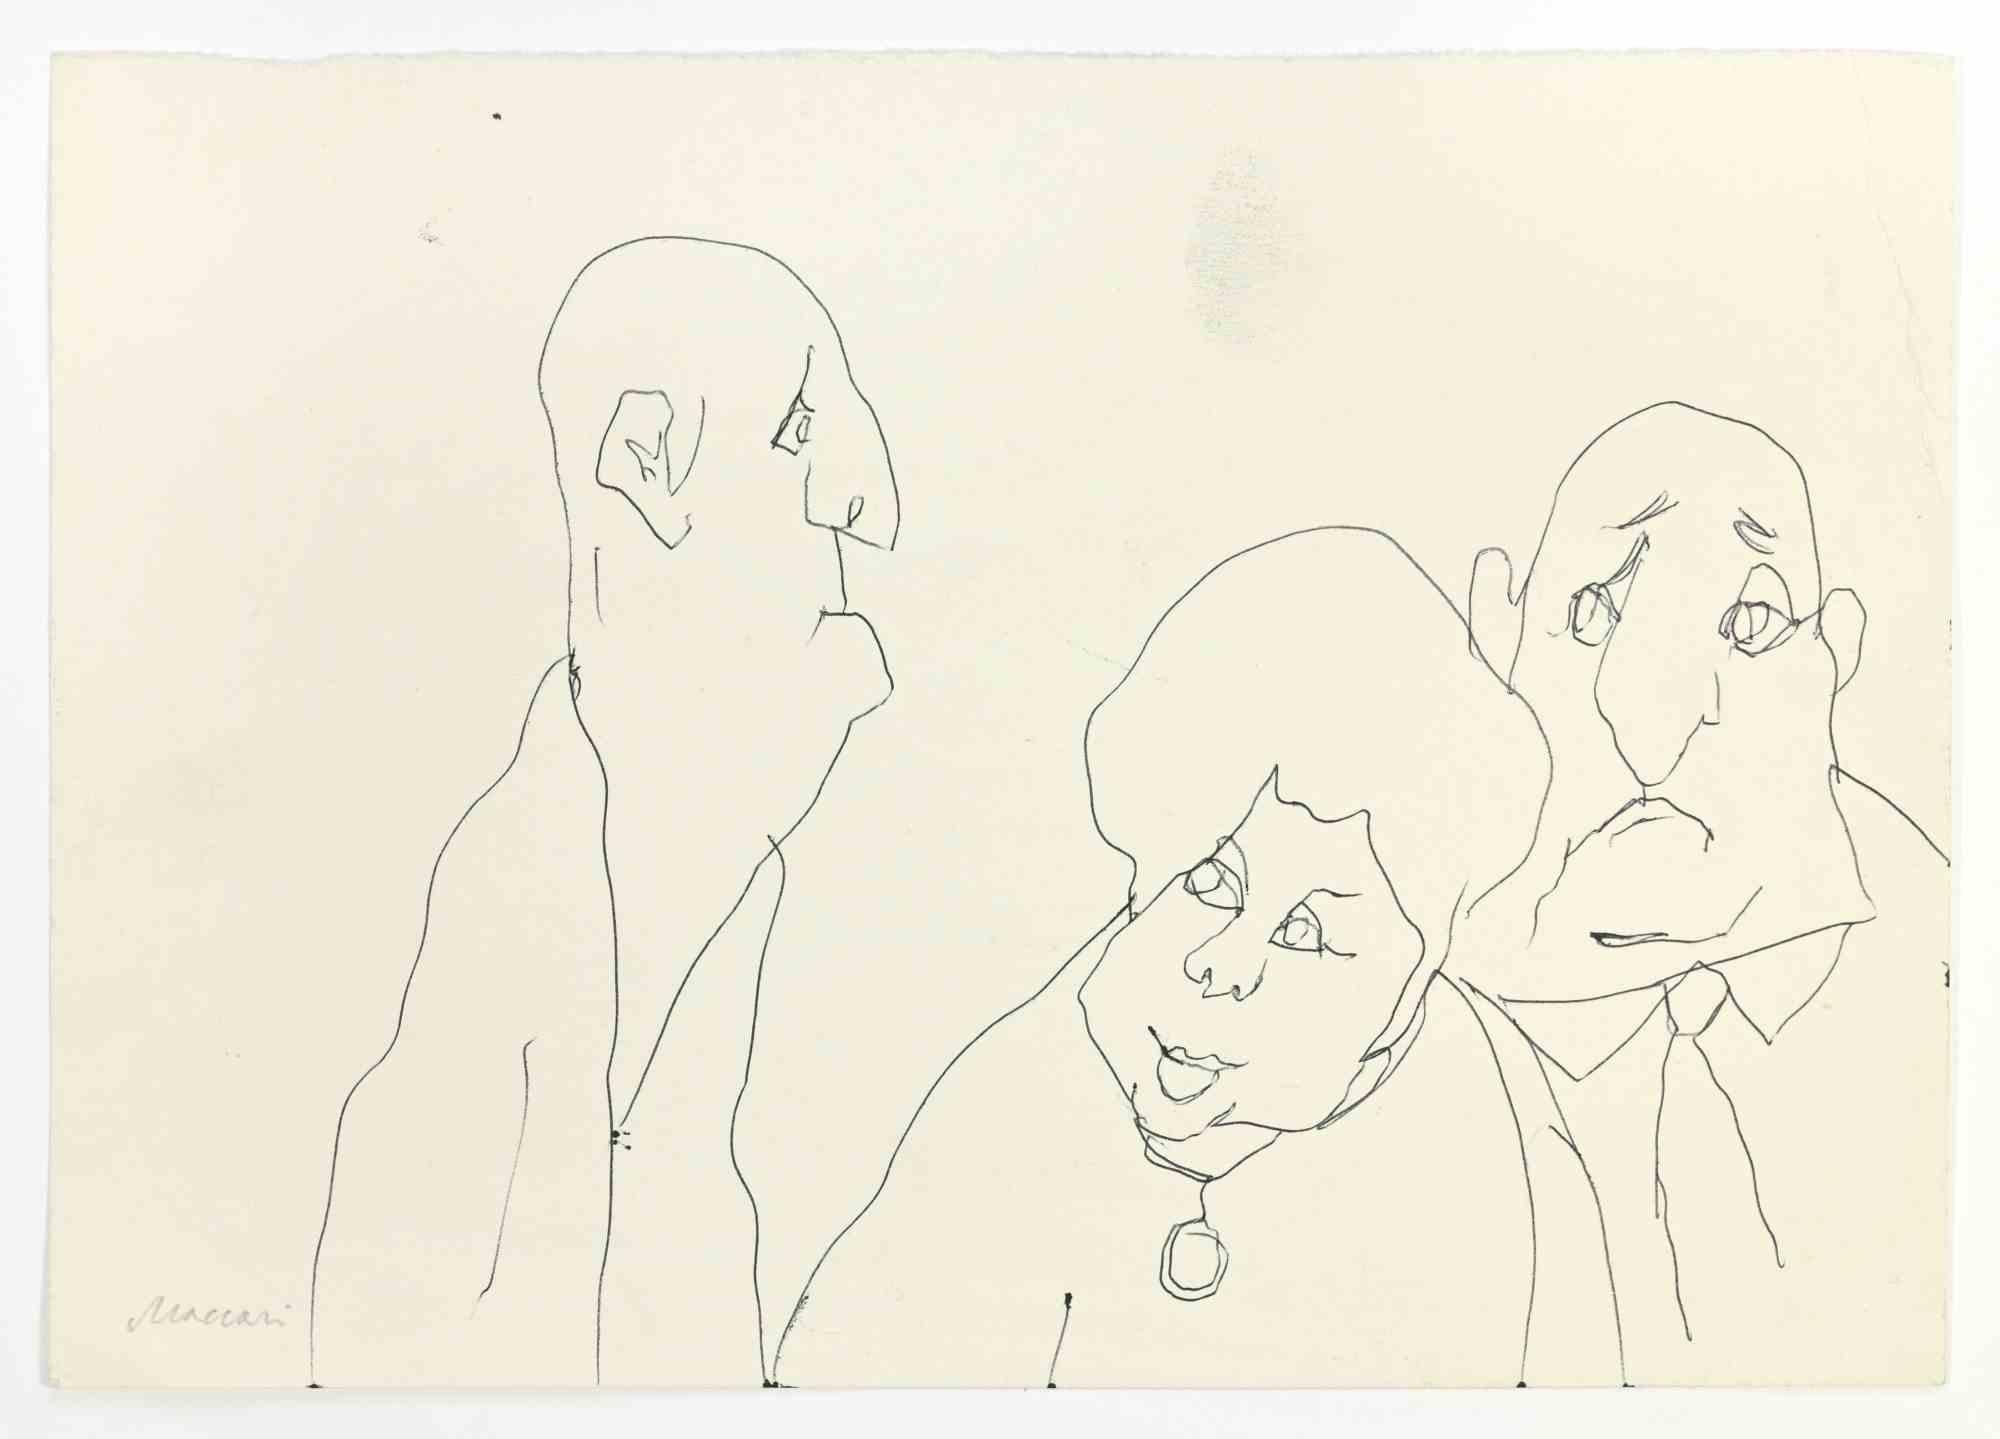 Figures is a Pen Drawing realized by Mino Maccari  (1924-1989) in the 1960s.

Hand-signed on the lower.

Good condition with slight folding and foxing.

Mino Maccari (Siena, 1924-Rome, June 16, 1989) was an Italian writer, painter, engraver and